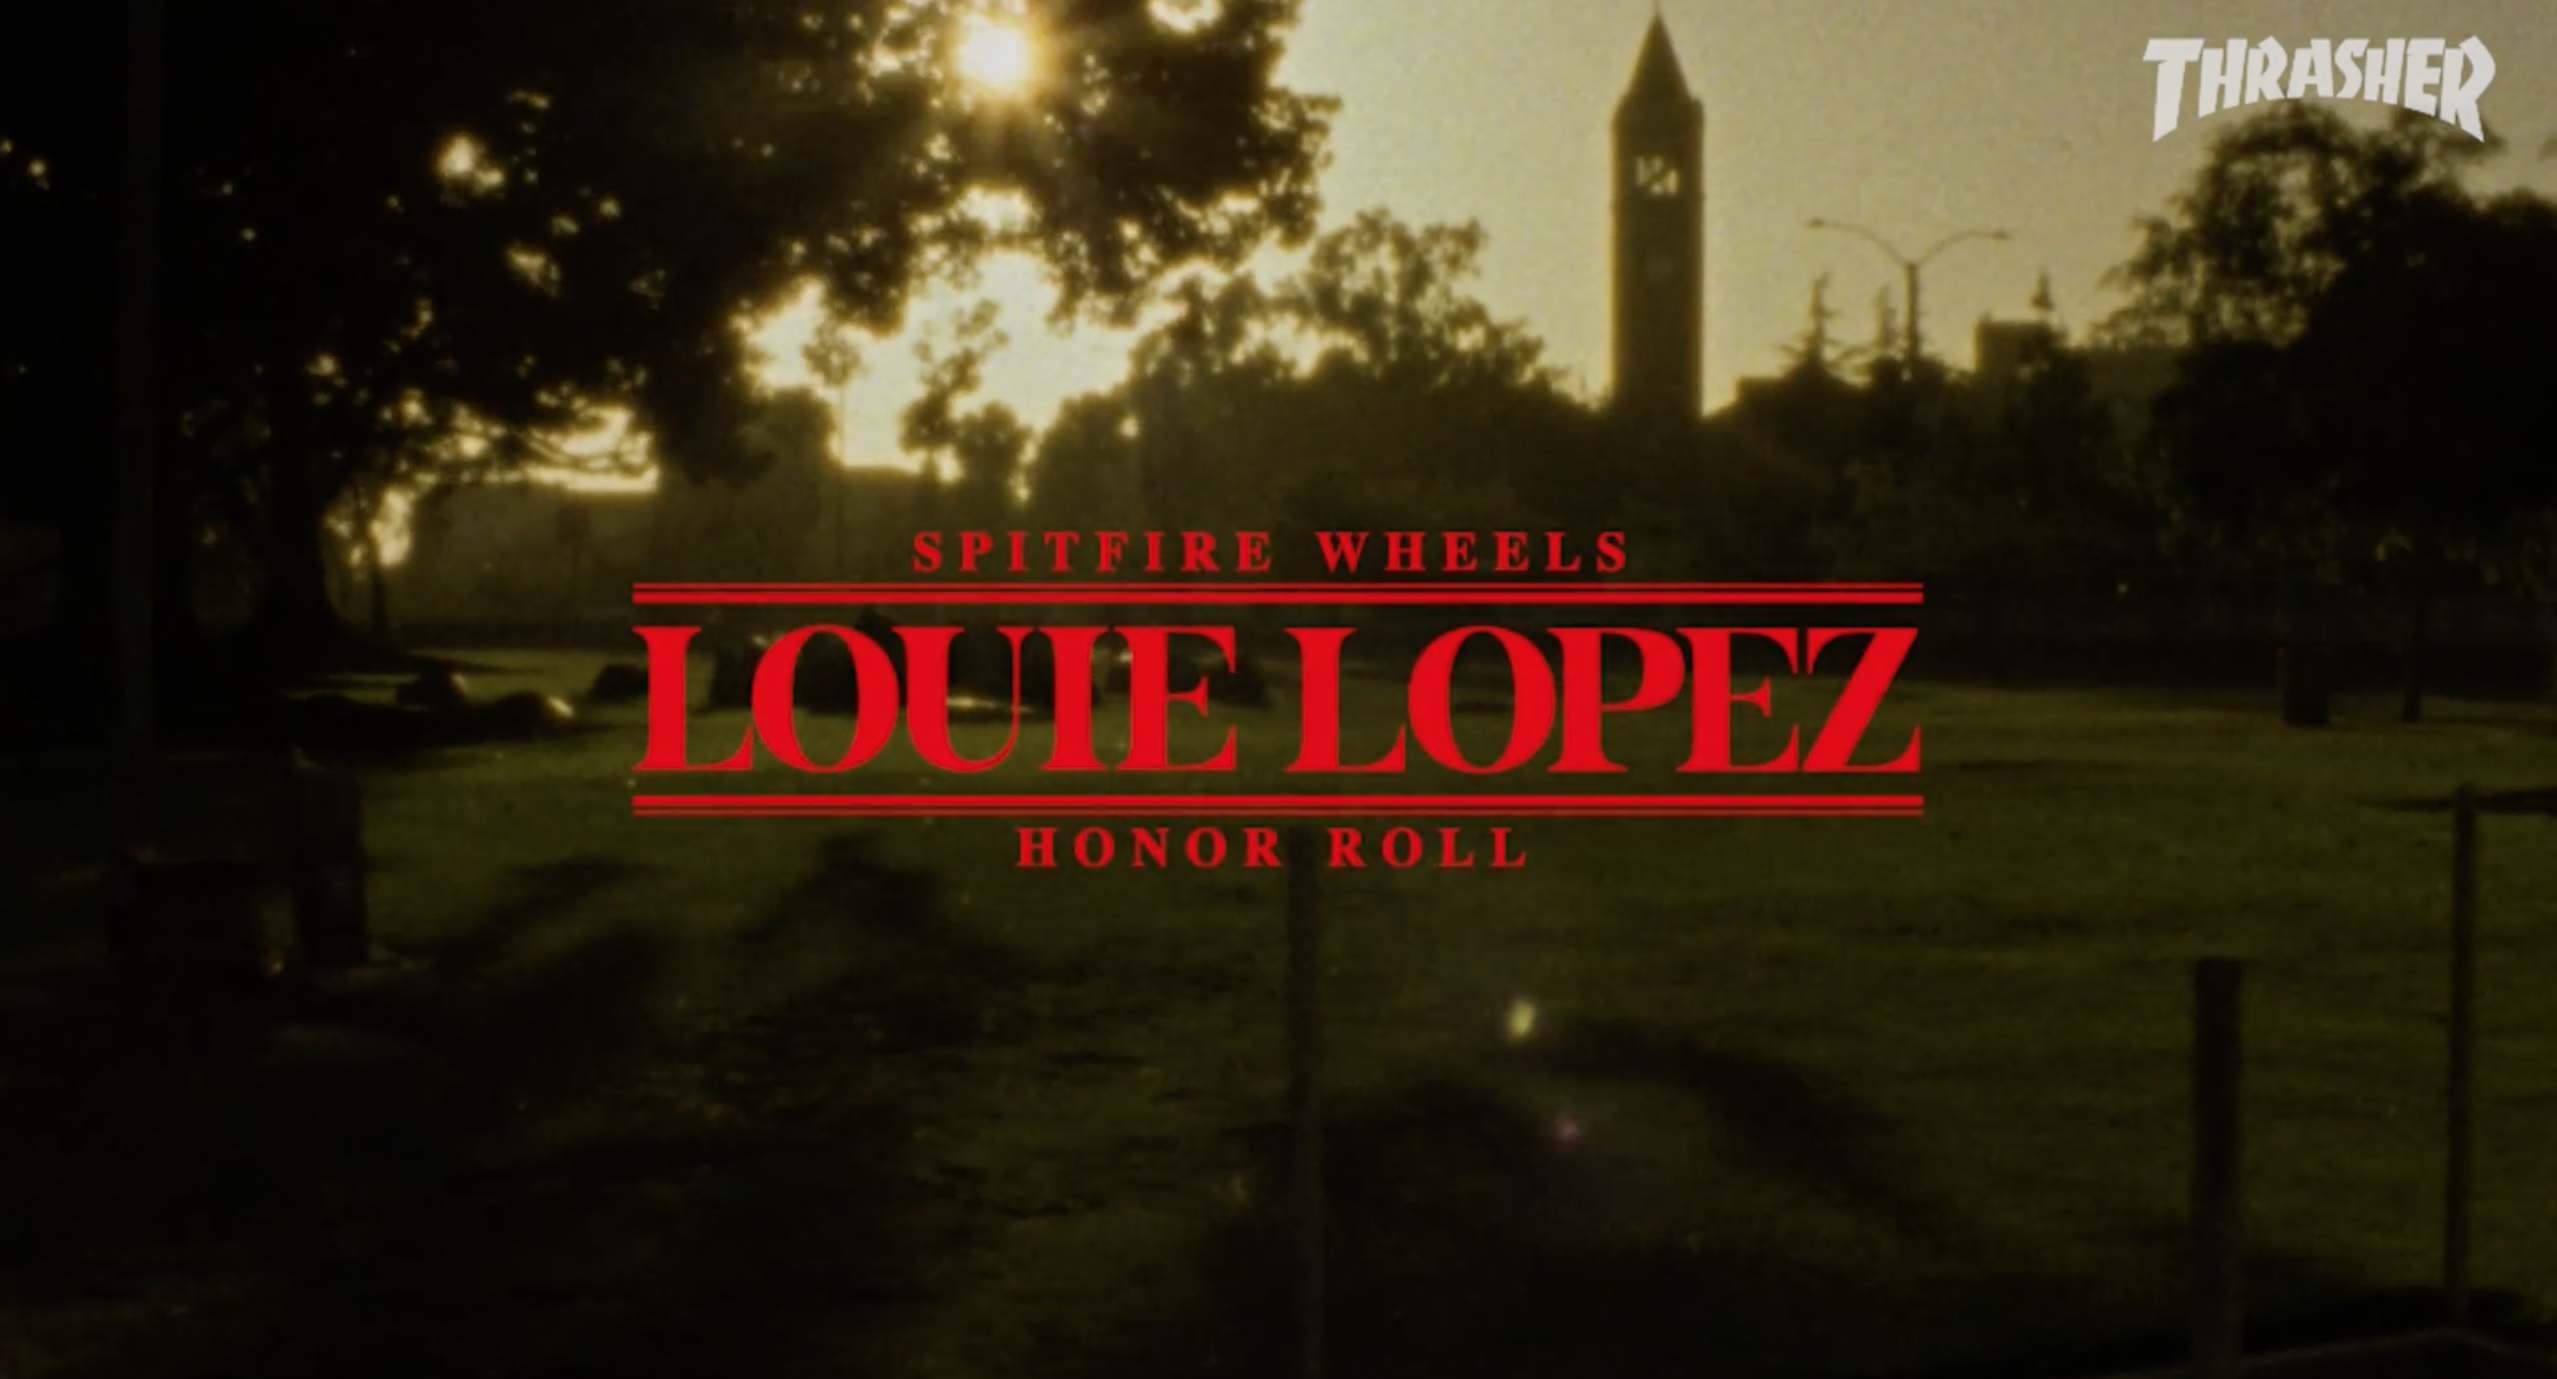 Spitfire - Louie Lopez' "Honor Roll" Part cover